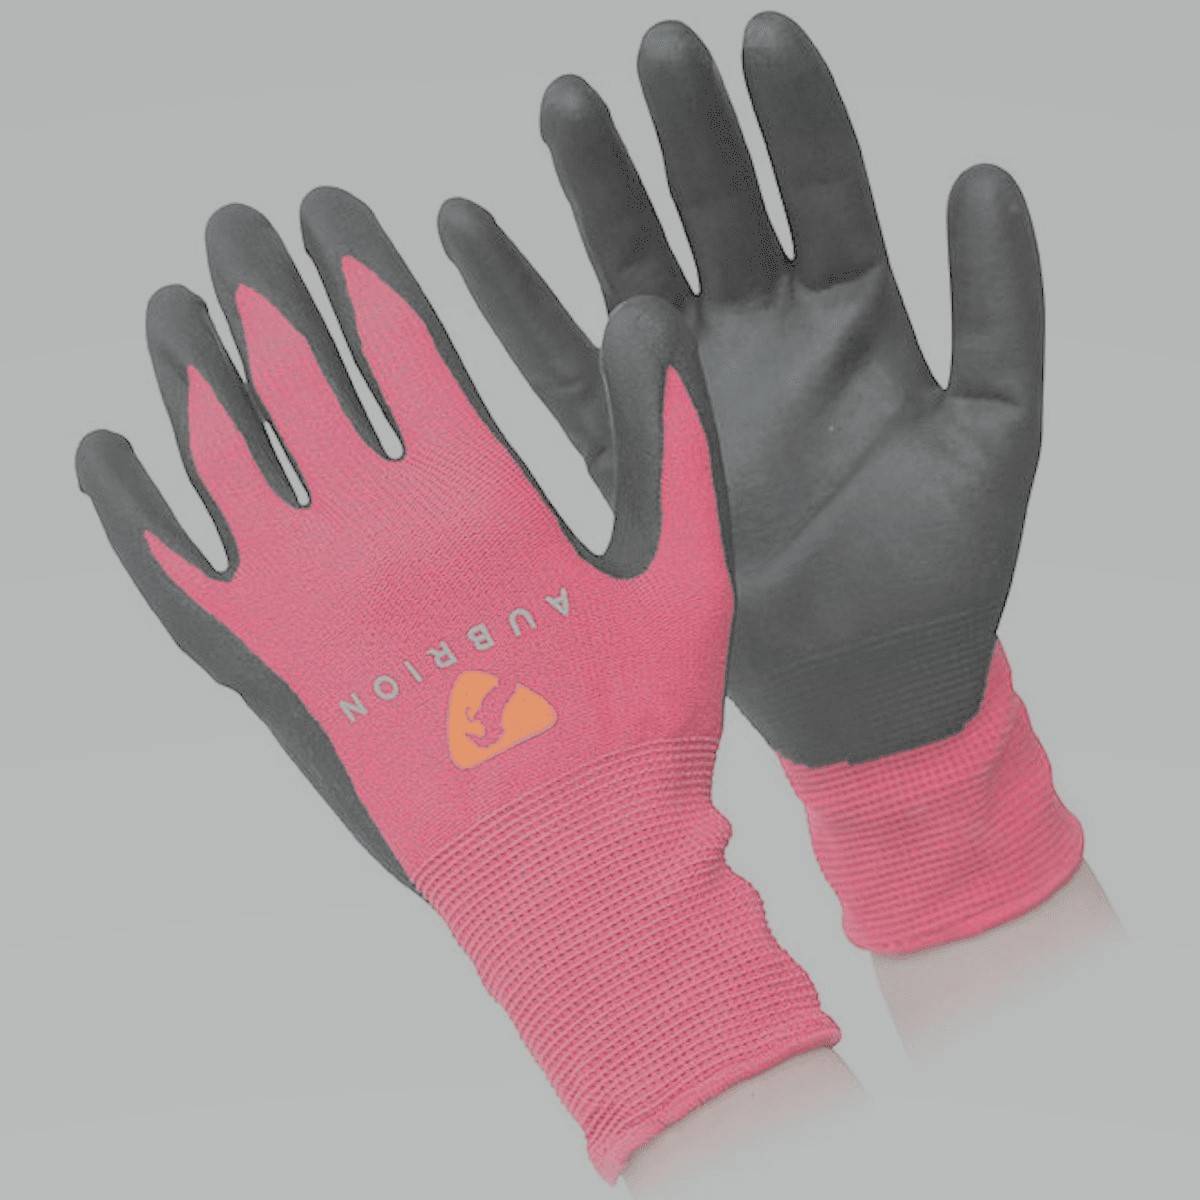 Shires All Purpose Yard Gloves 